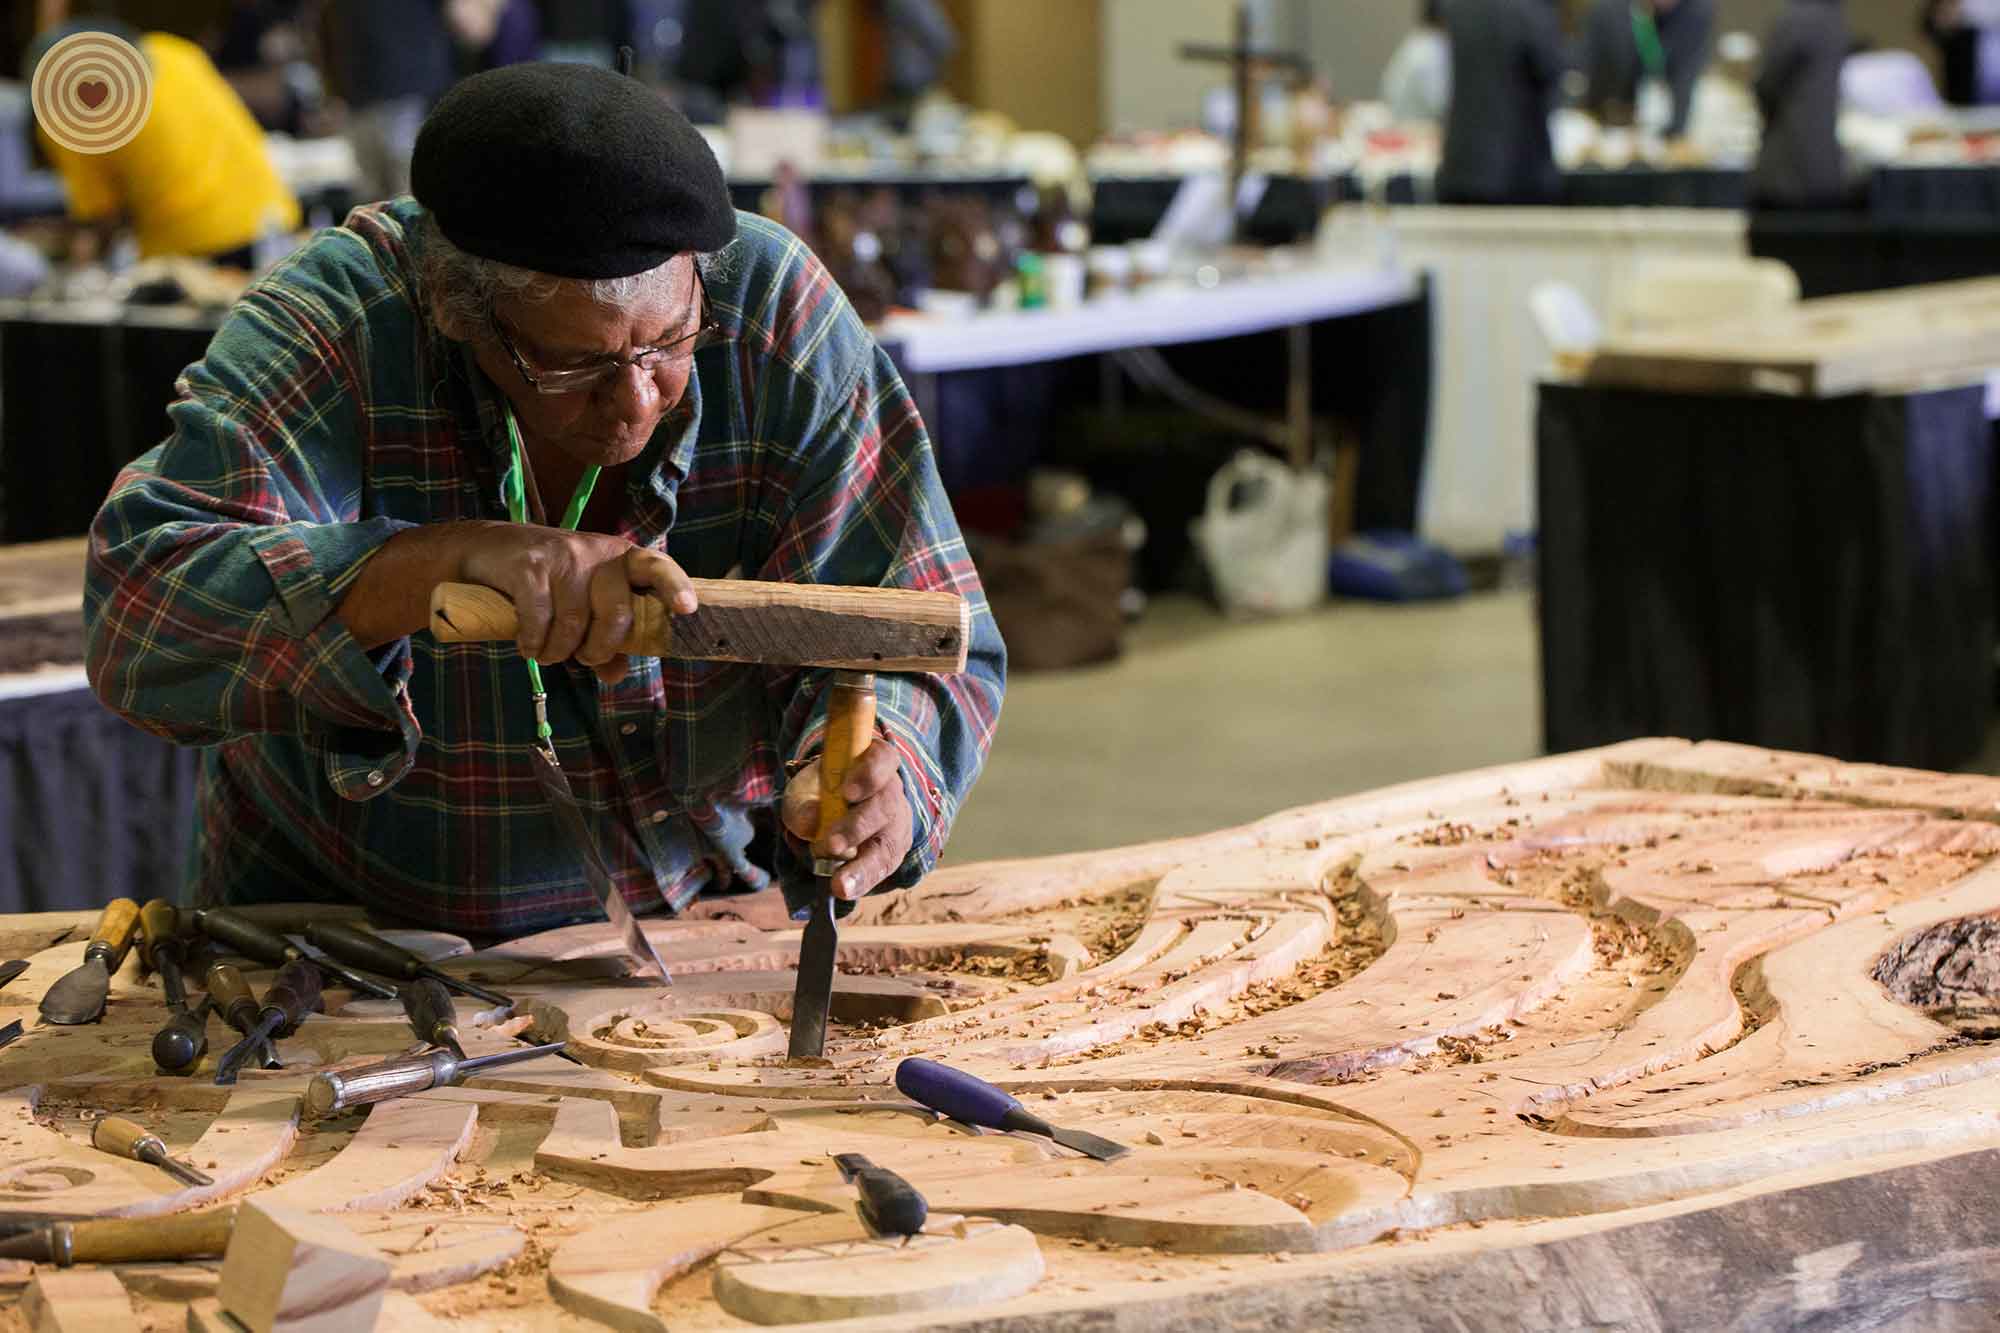  woodcarving show